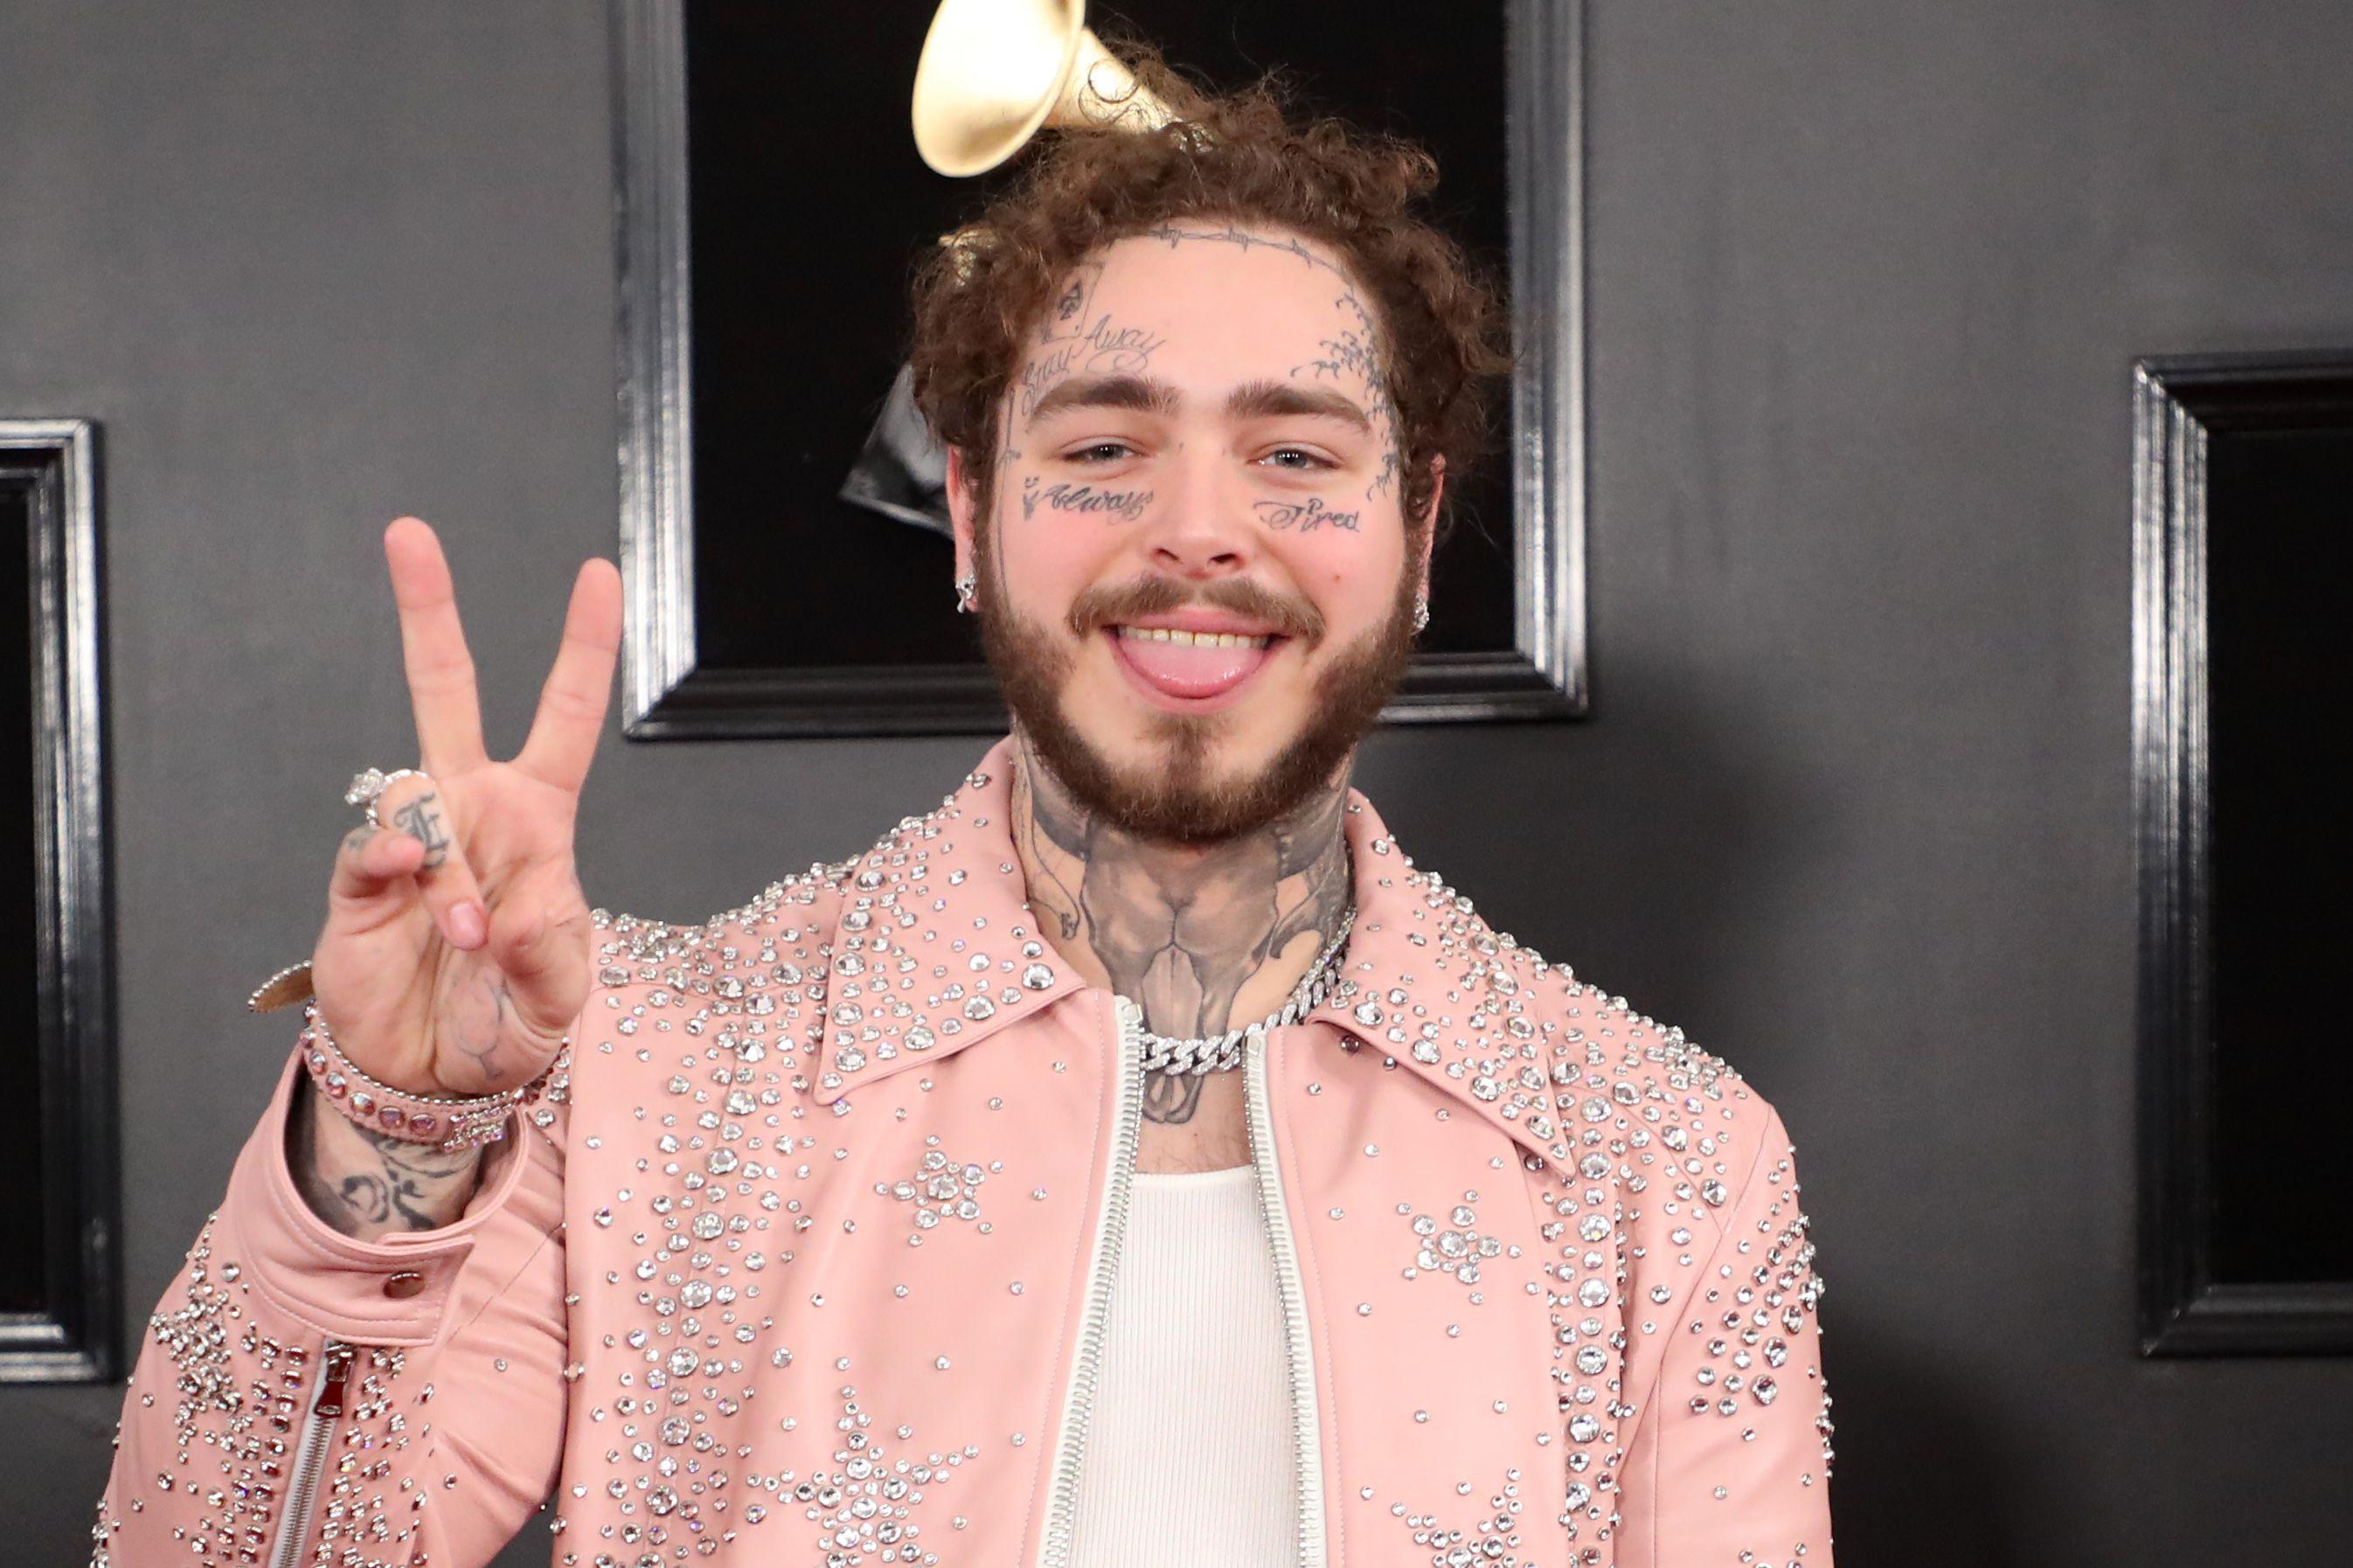 Post Malone Net Worth: How much money does singer Post Malone have?